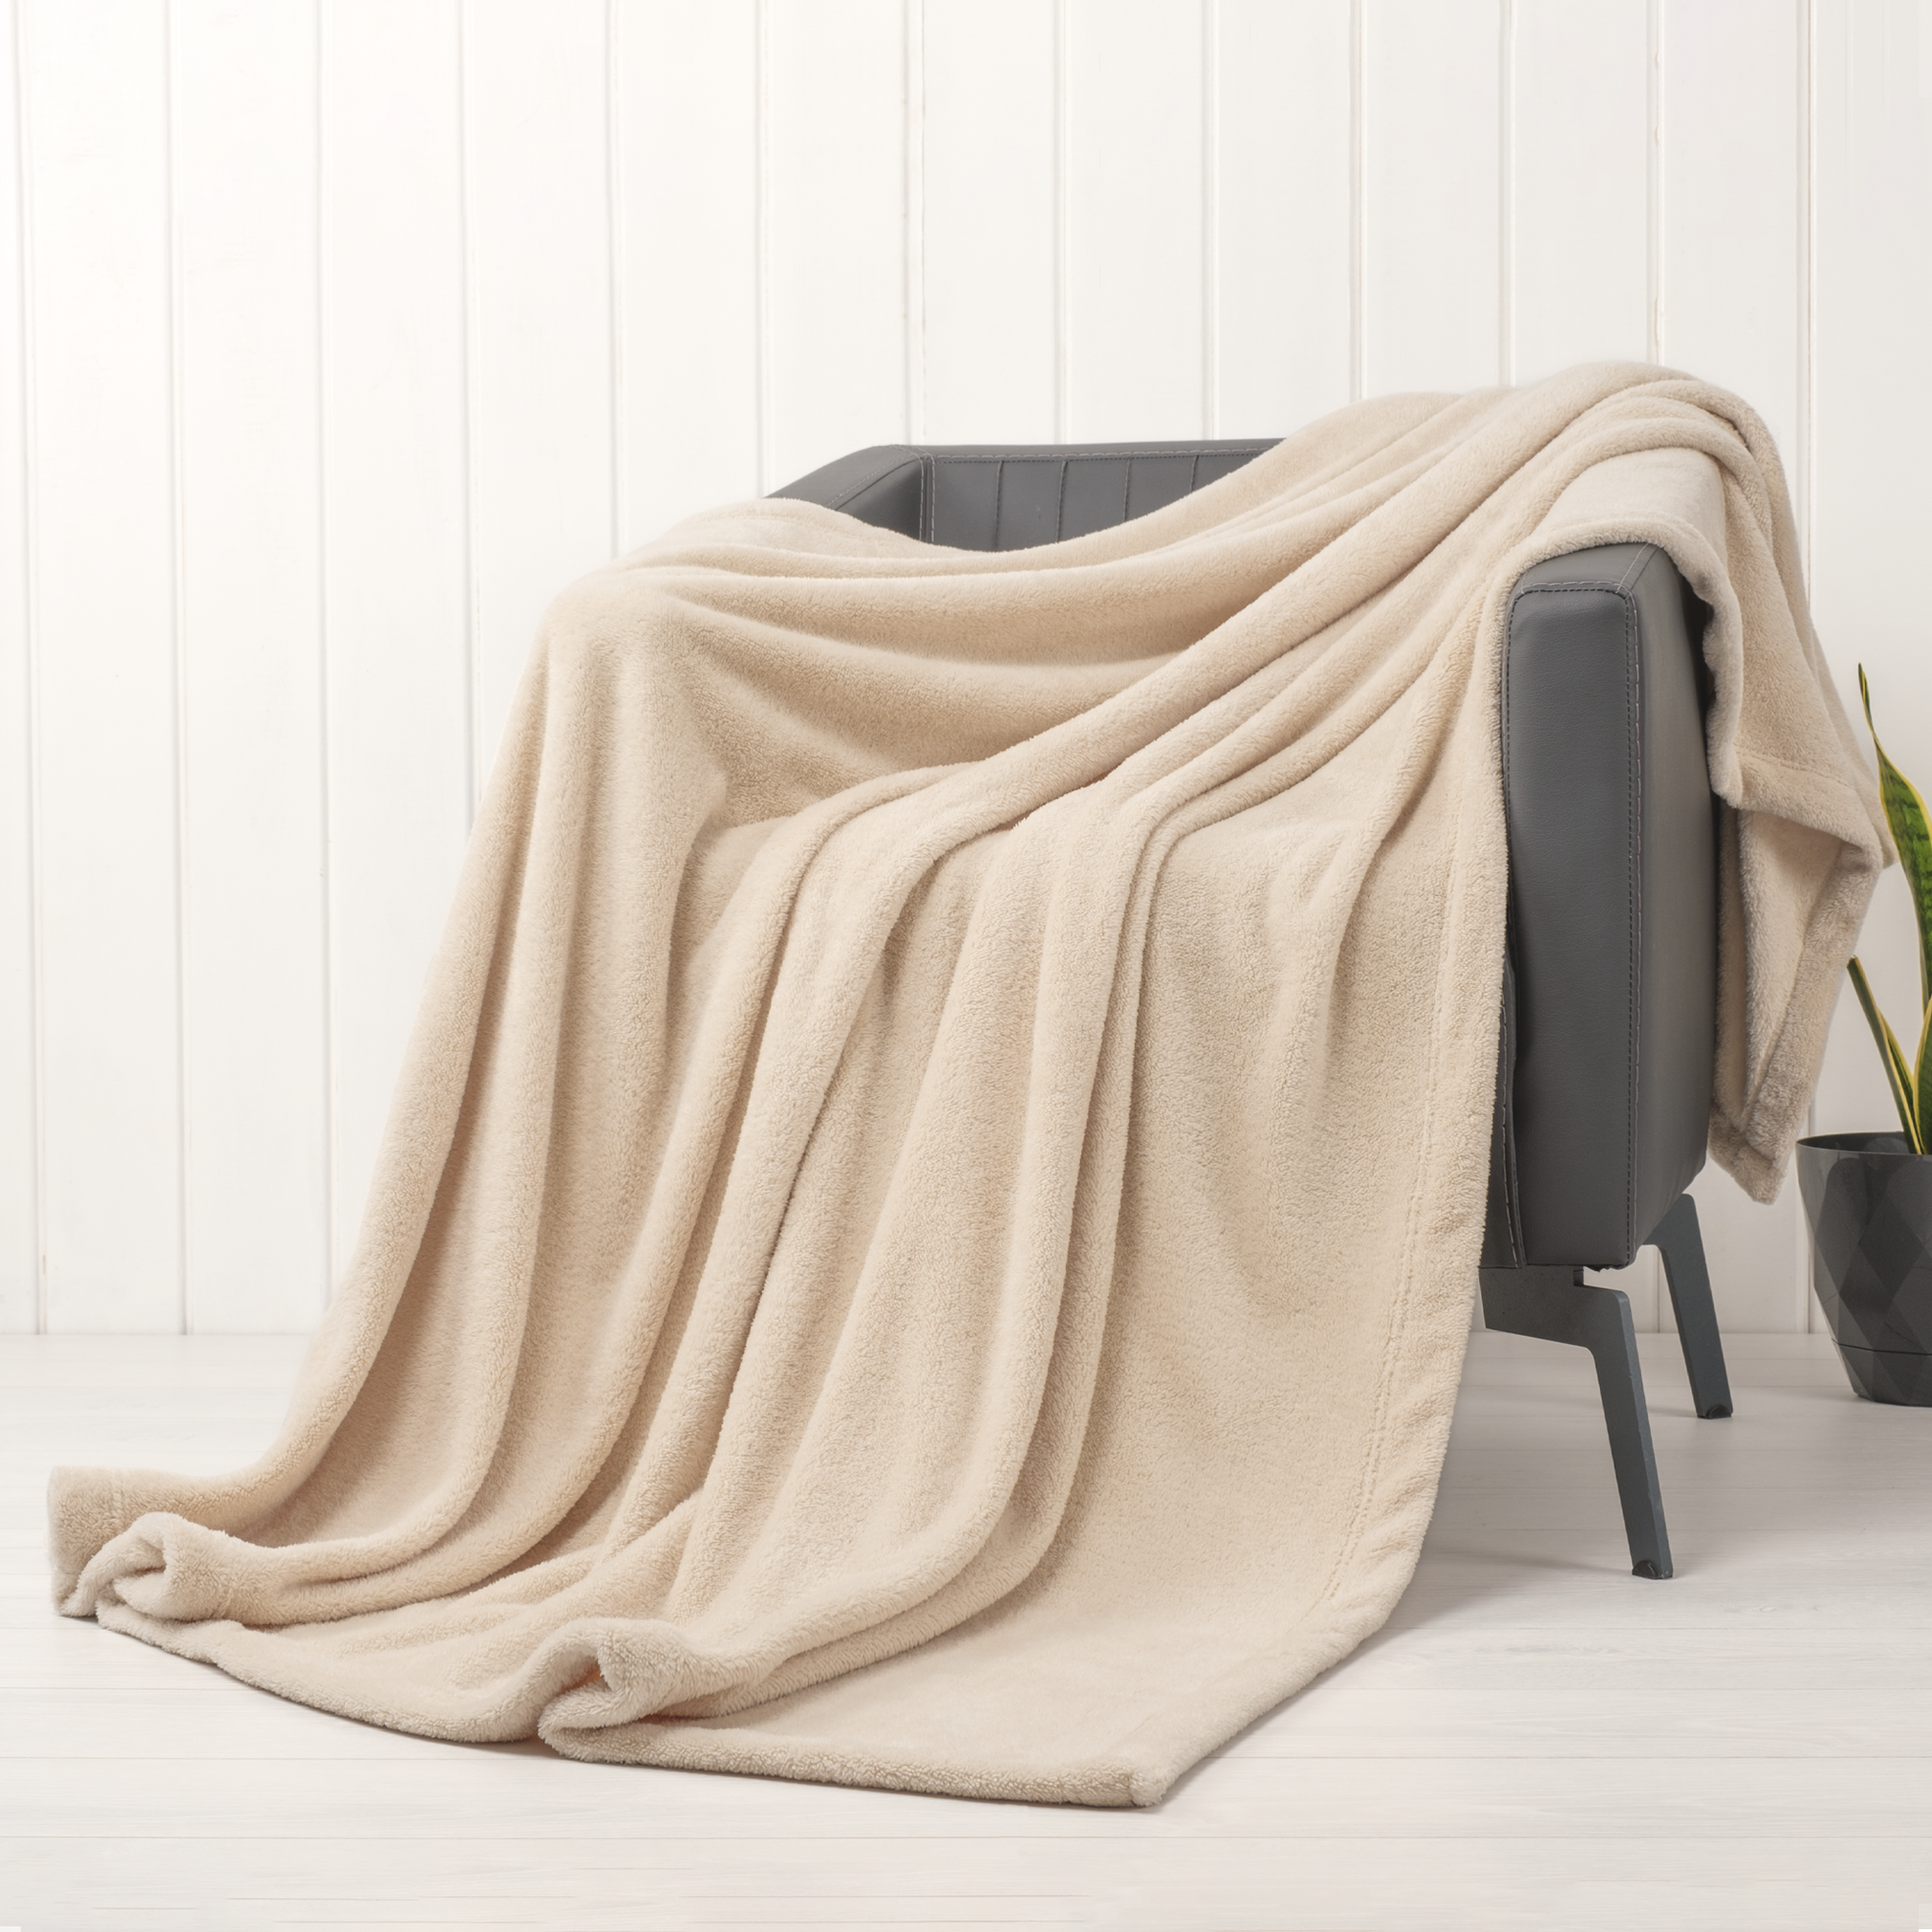 American Soft Linen - Bedding Fleece Blanket - Wholesale - 9 Set Case Pack - Queen Size 85x90 inches - Sand-Taupe - 1